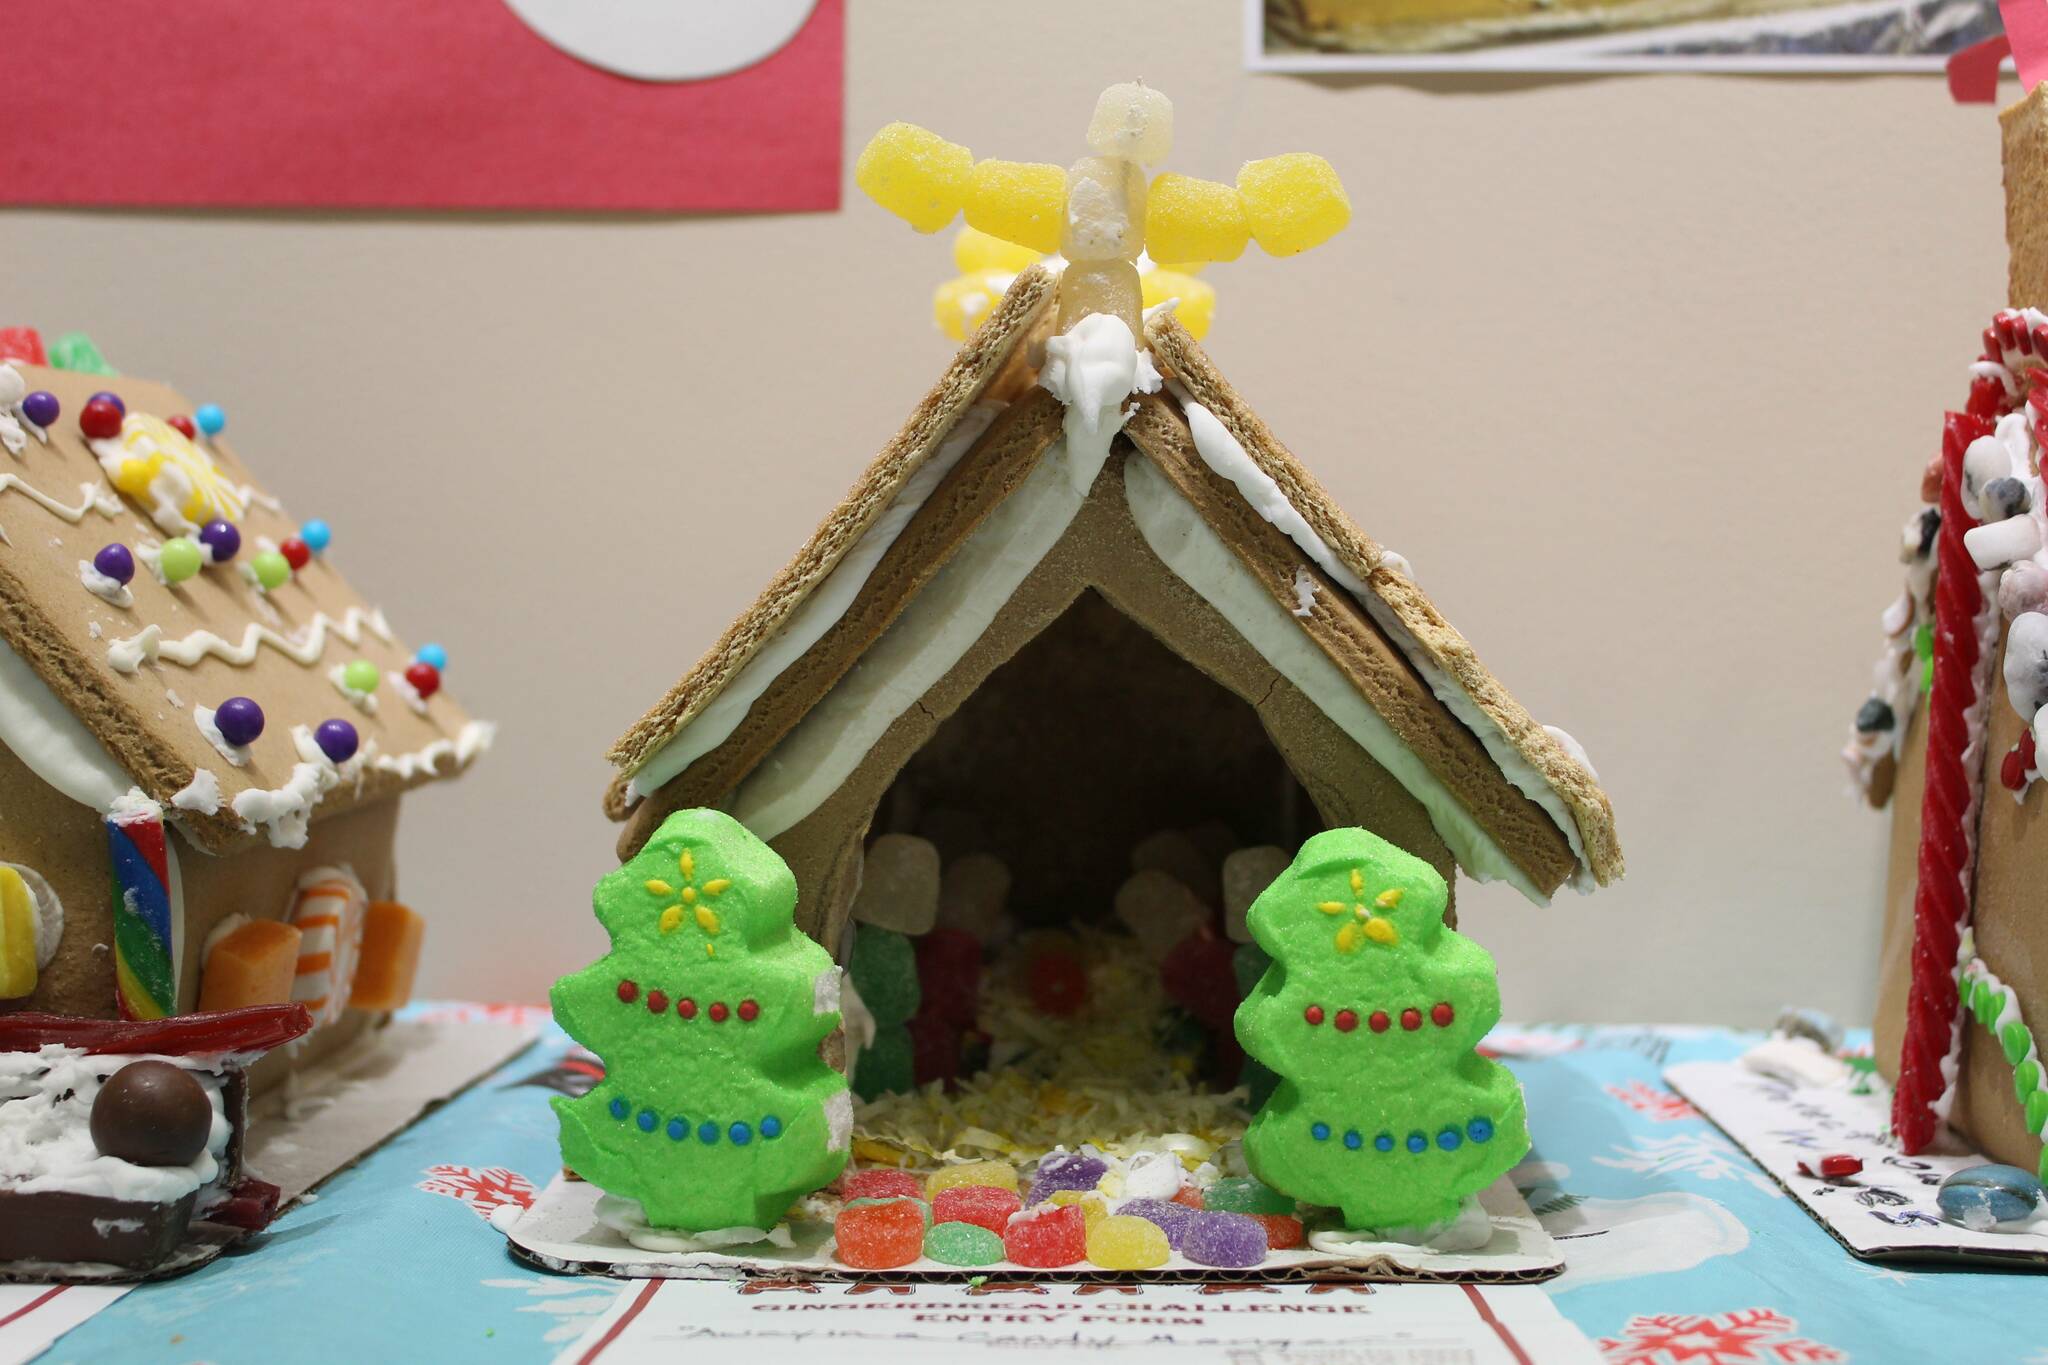 Photo by Karina Andrew/Whidbey News-Times
“Away in a Candy Manger” by Emmy Carlson won the popular vote.